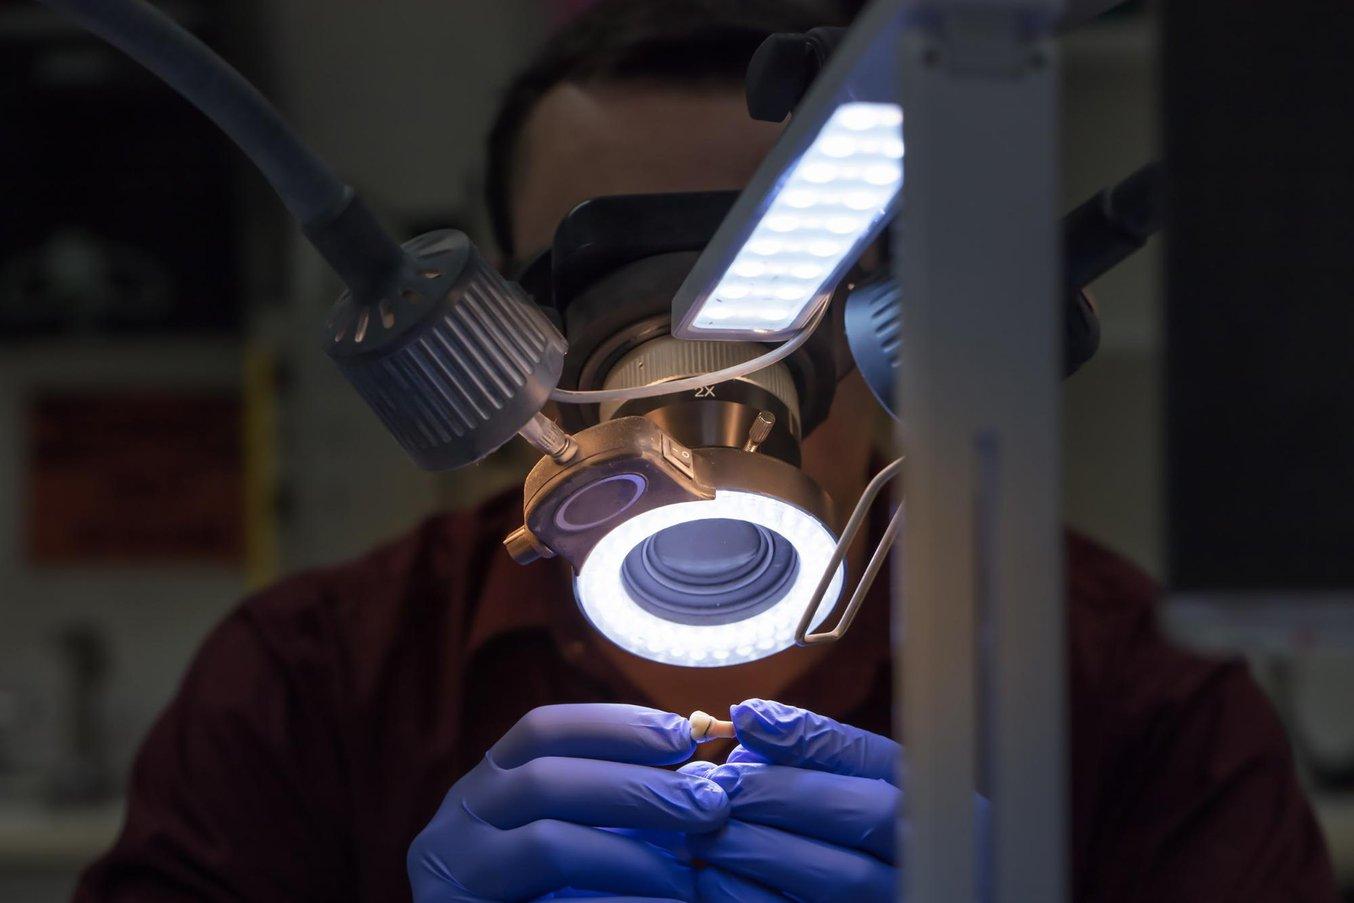 Dental professional examining a die model under a light and lens.